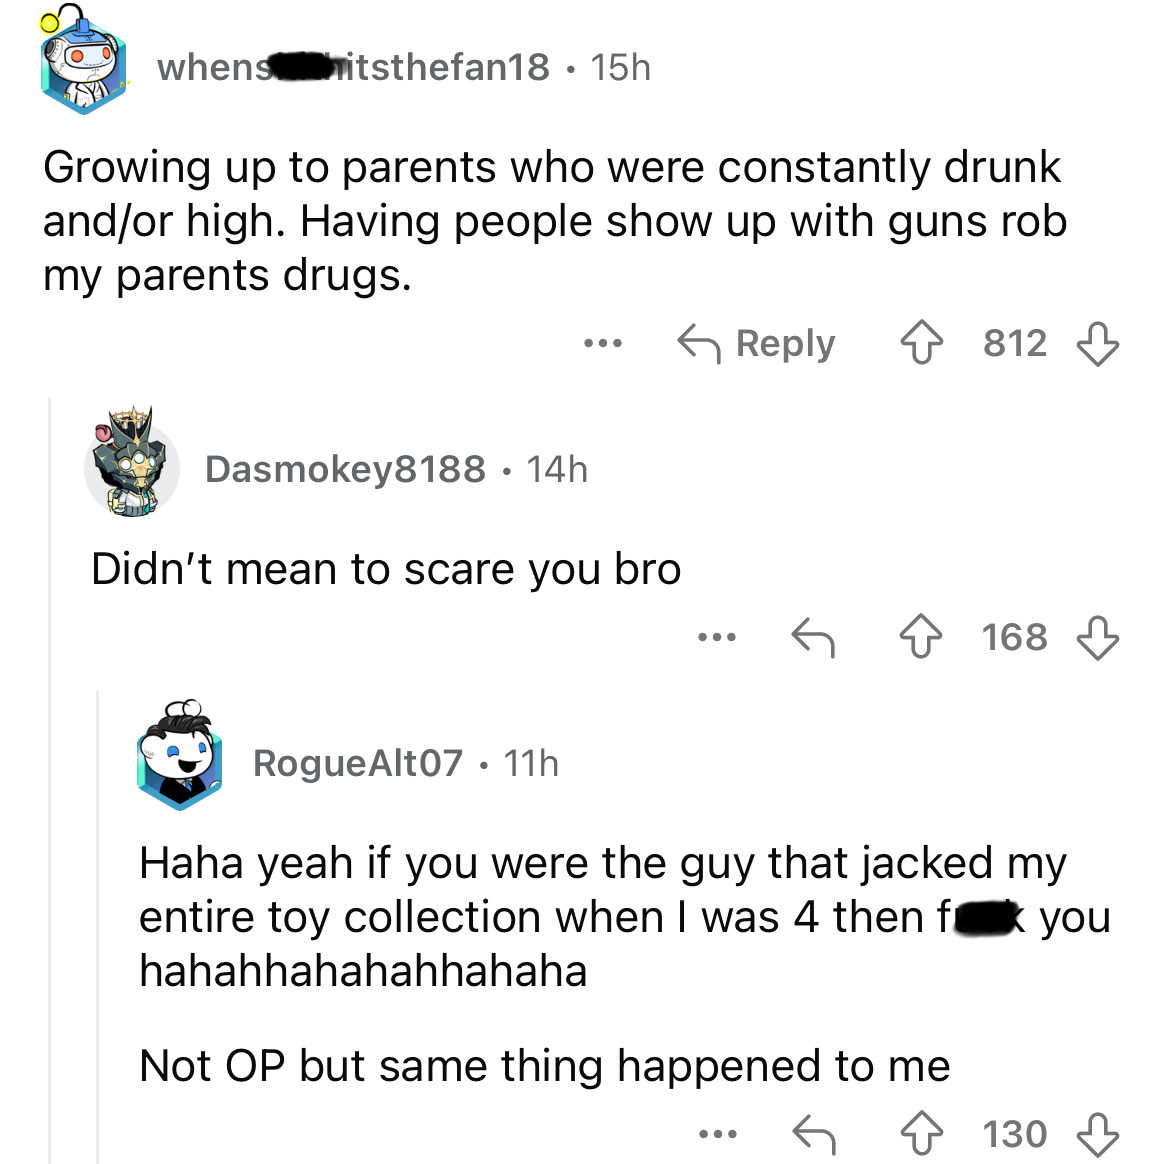 screenshot - whens itsthefan18 15h Growing up to parents who were constantly drunk andor high. Having people show up with guns rob my parents drugs. Dasmokey8188.14h Didn't mean to scare you bro 812 ... 168 RogueAlt07 11h Haha yeah if you were the guy tha